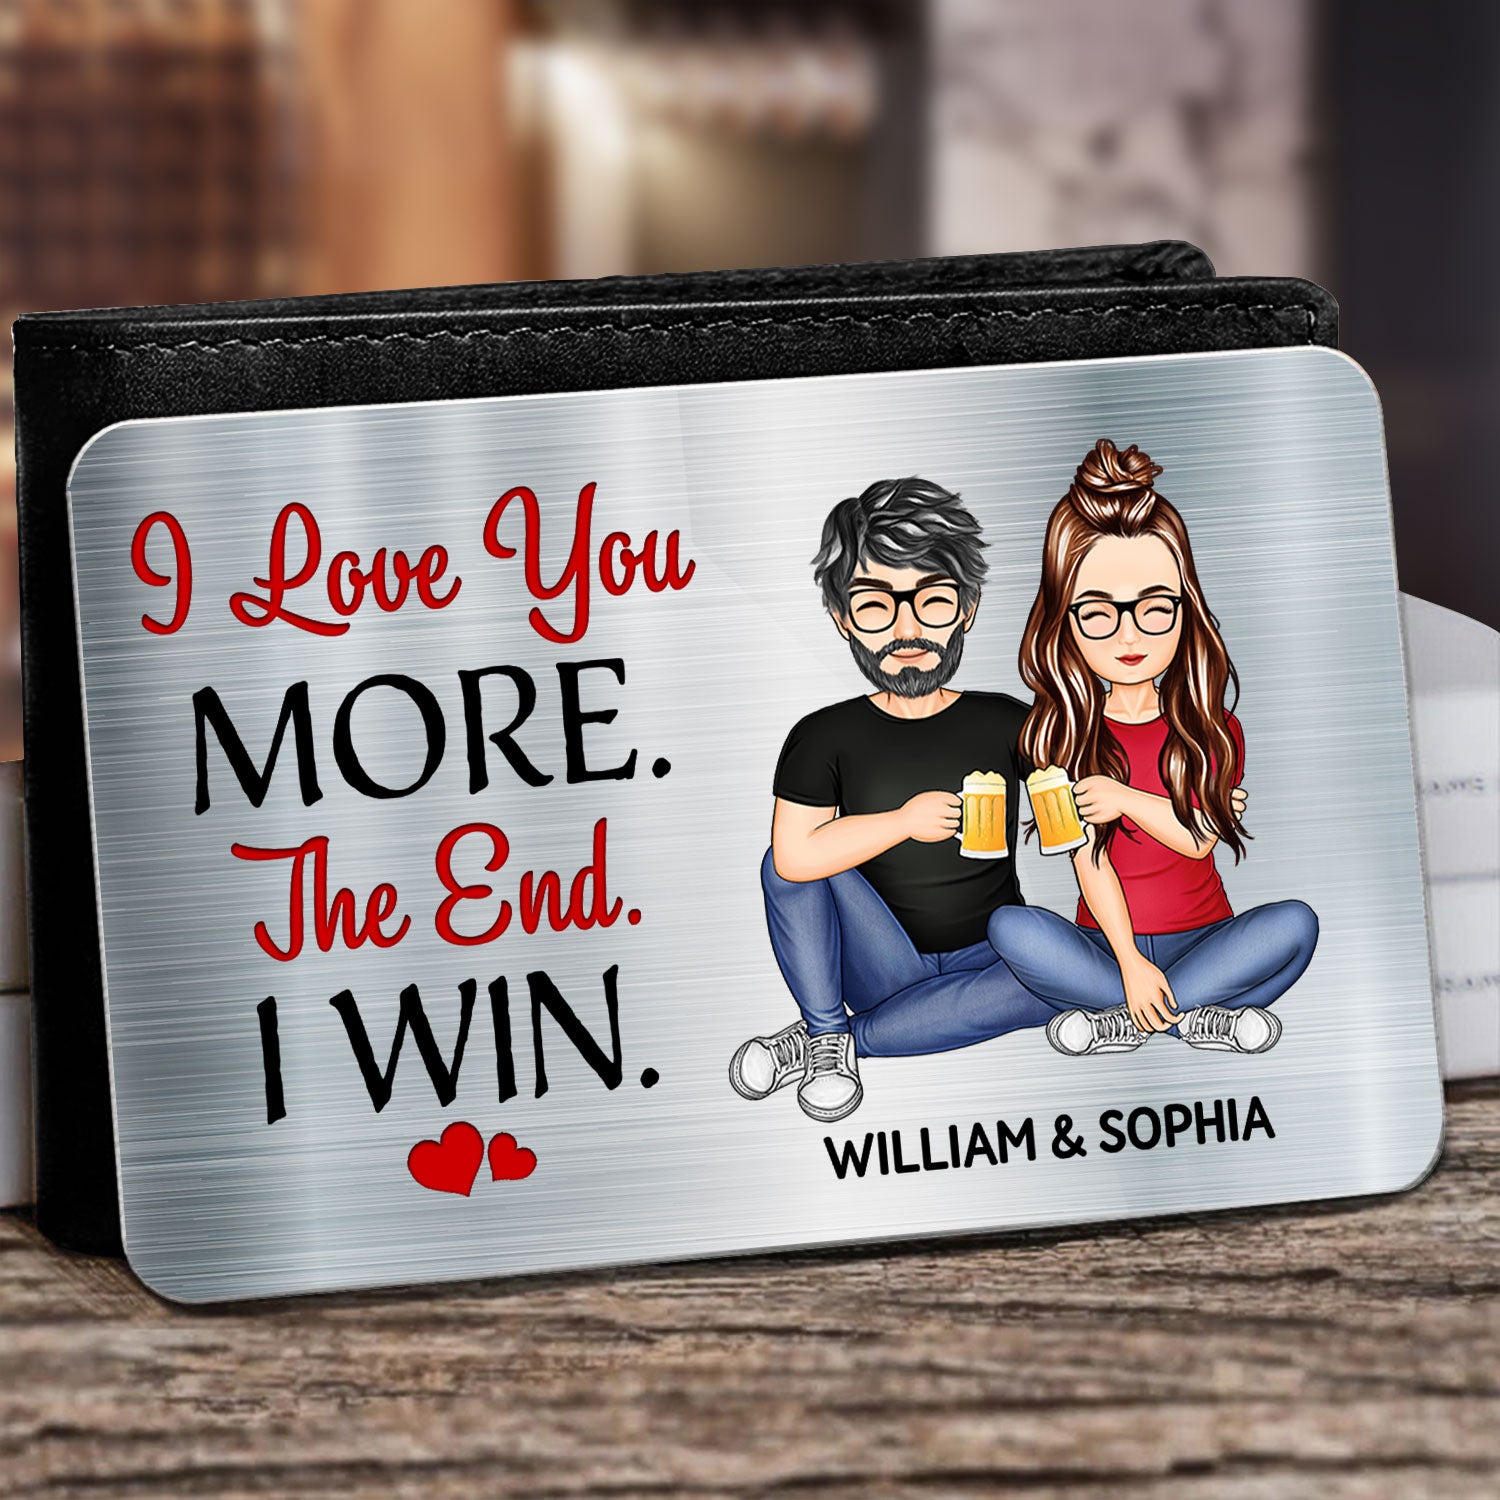 I Love You More - Gift For Couples, Husband, Wife - Personalized Aluminum Wallet Card